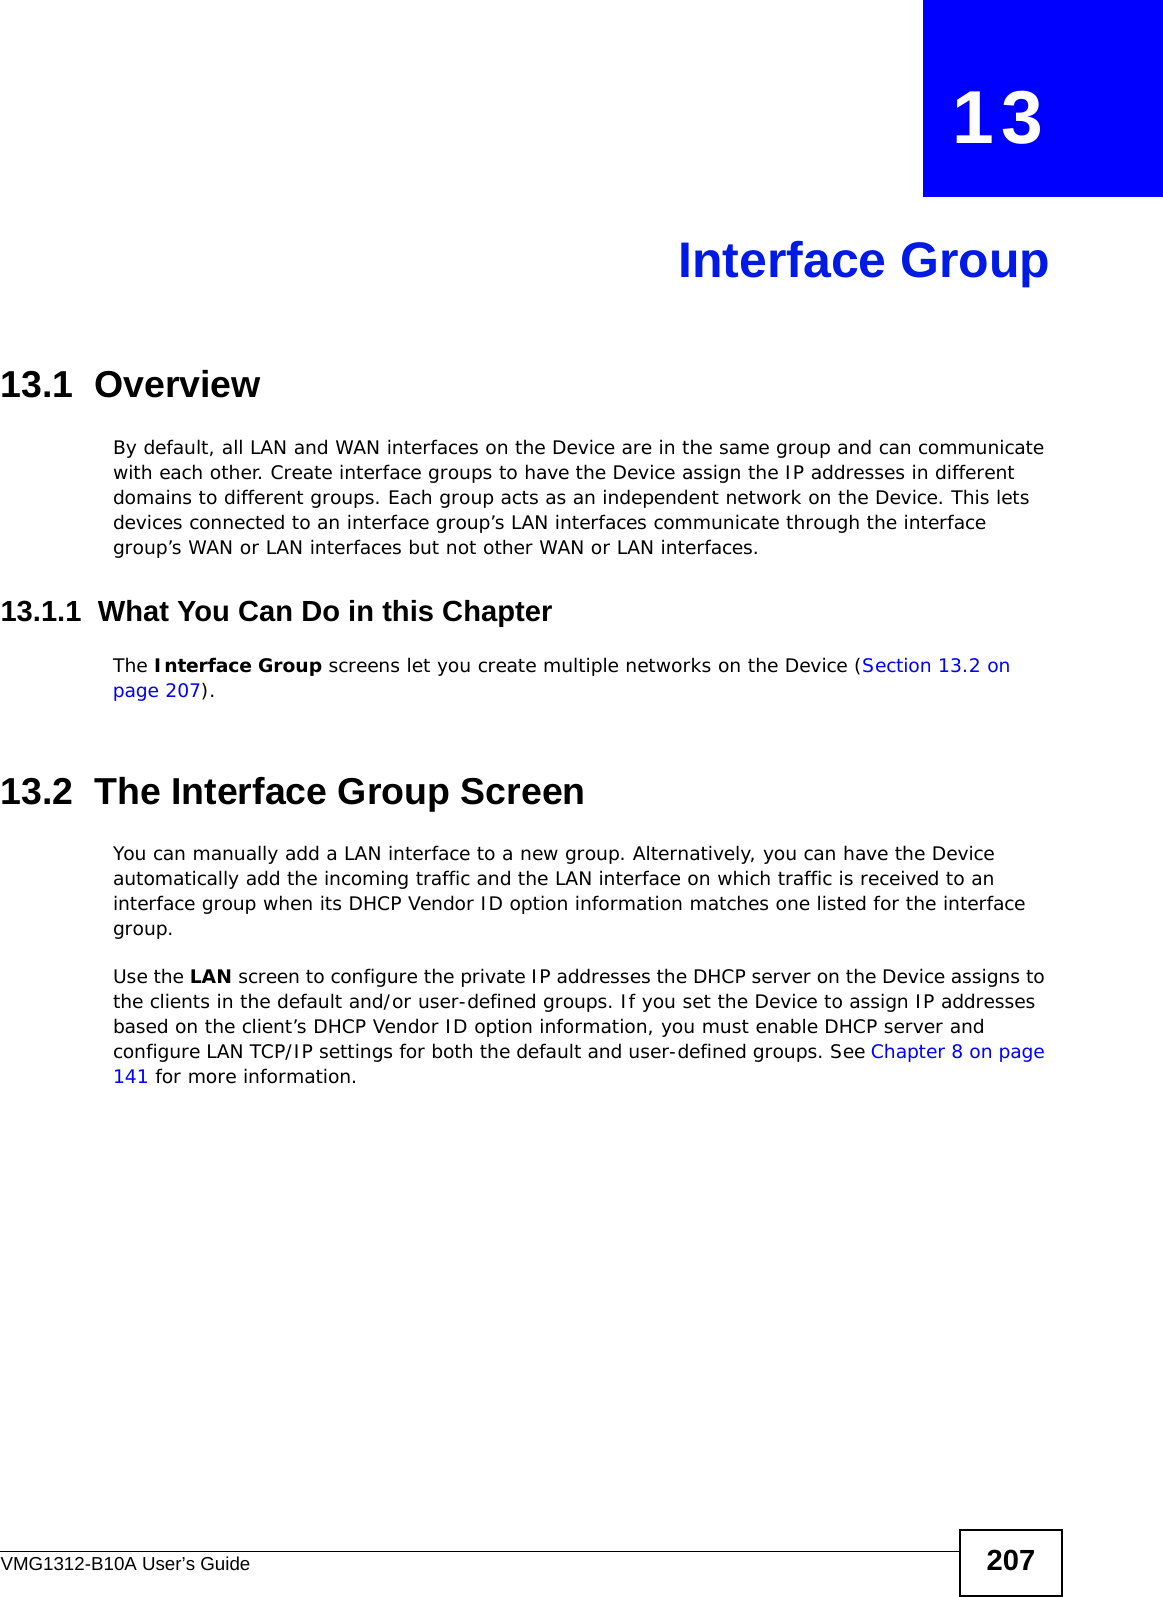 VMG1312-B10A User’s Guide 207CHAPTER   13Interface Group13.1  OverviewBy default, all LAN and WAN interfaces on the Device are in the same group and can communicate with each other. Create interface groups to have the Device assign the IP addresses in different domains to different groups. Each group acts as an independent network on the Device. This lets devices connected to an interface group’s LAN interfaces communicate through the interface group’s WAN or LAN interfaces but not other WAN or LAN interfaces.13.1.1  What You Can Do in this ChapterThe Interface Group screens let you create multiple networks on the Device (Section 13.2 on page 207).13.2  The Interface Group ScreenYou can manually add a LAN interface to a new group. Alternatively, you can have the Device automatically add the incoming traffic and the LAN interface on which traffic is received to an interface group when its DHCP Vendor ID option information matches one listed for the interface group. Use the LAN screen to configure the private IP addresses the DHCP server on the Device assigns to the clients in the default and/or user-defined groups. If you set the Device to assign IP addresses based on the client’s DHCP Vendor ID option information, you must enable DHCP server and configure LAN TCP/IP settings for both the default and user-defined groups. See Chapter 8 on page 141 for more information.